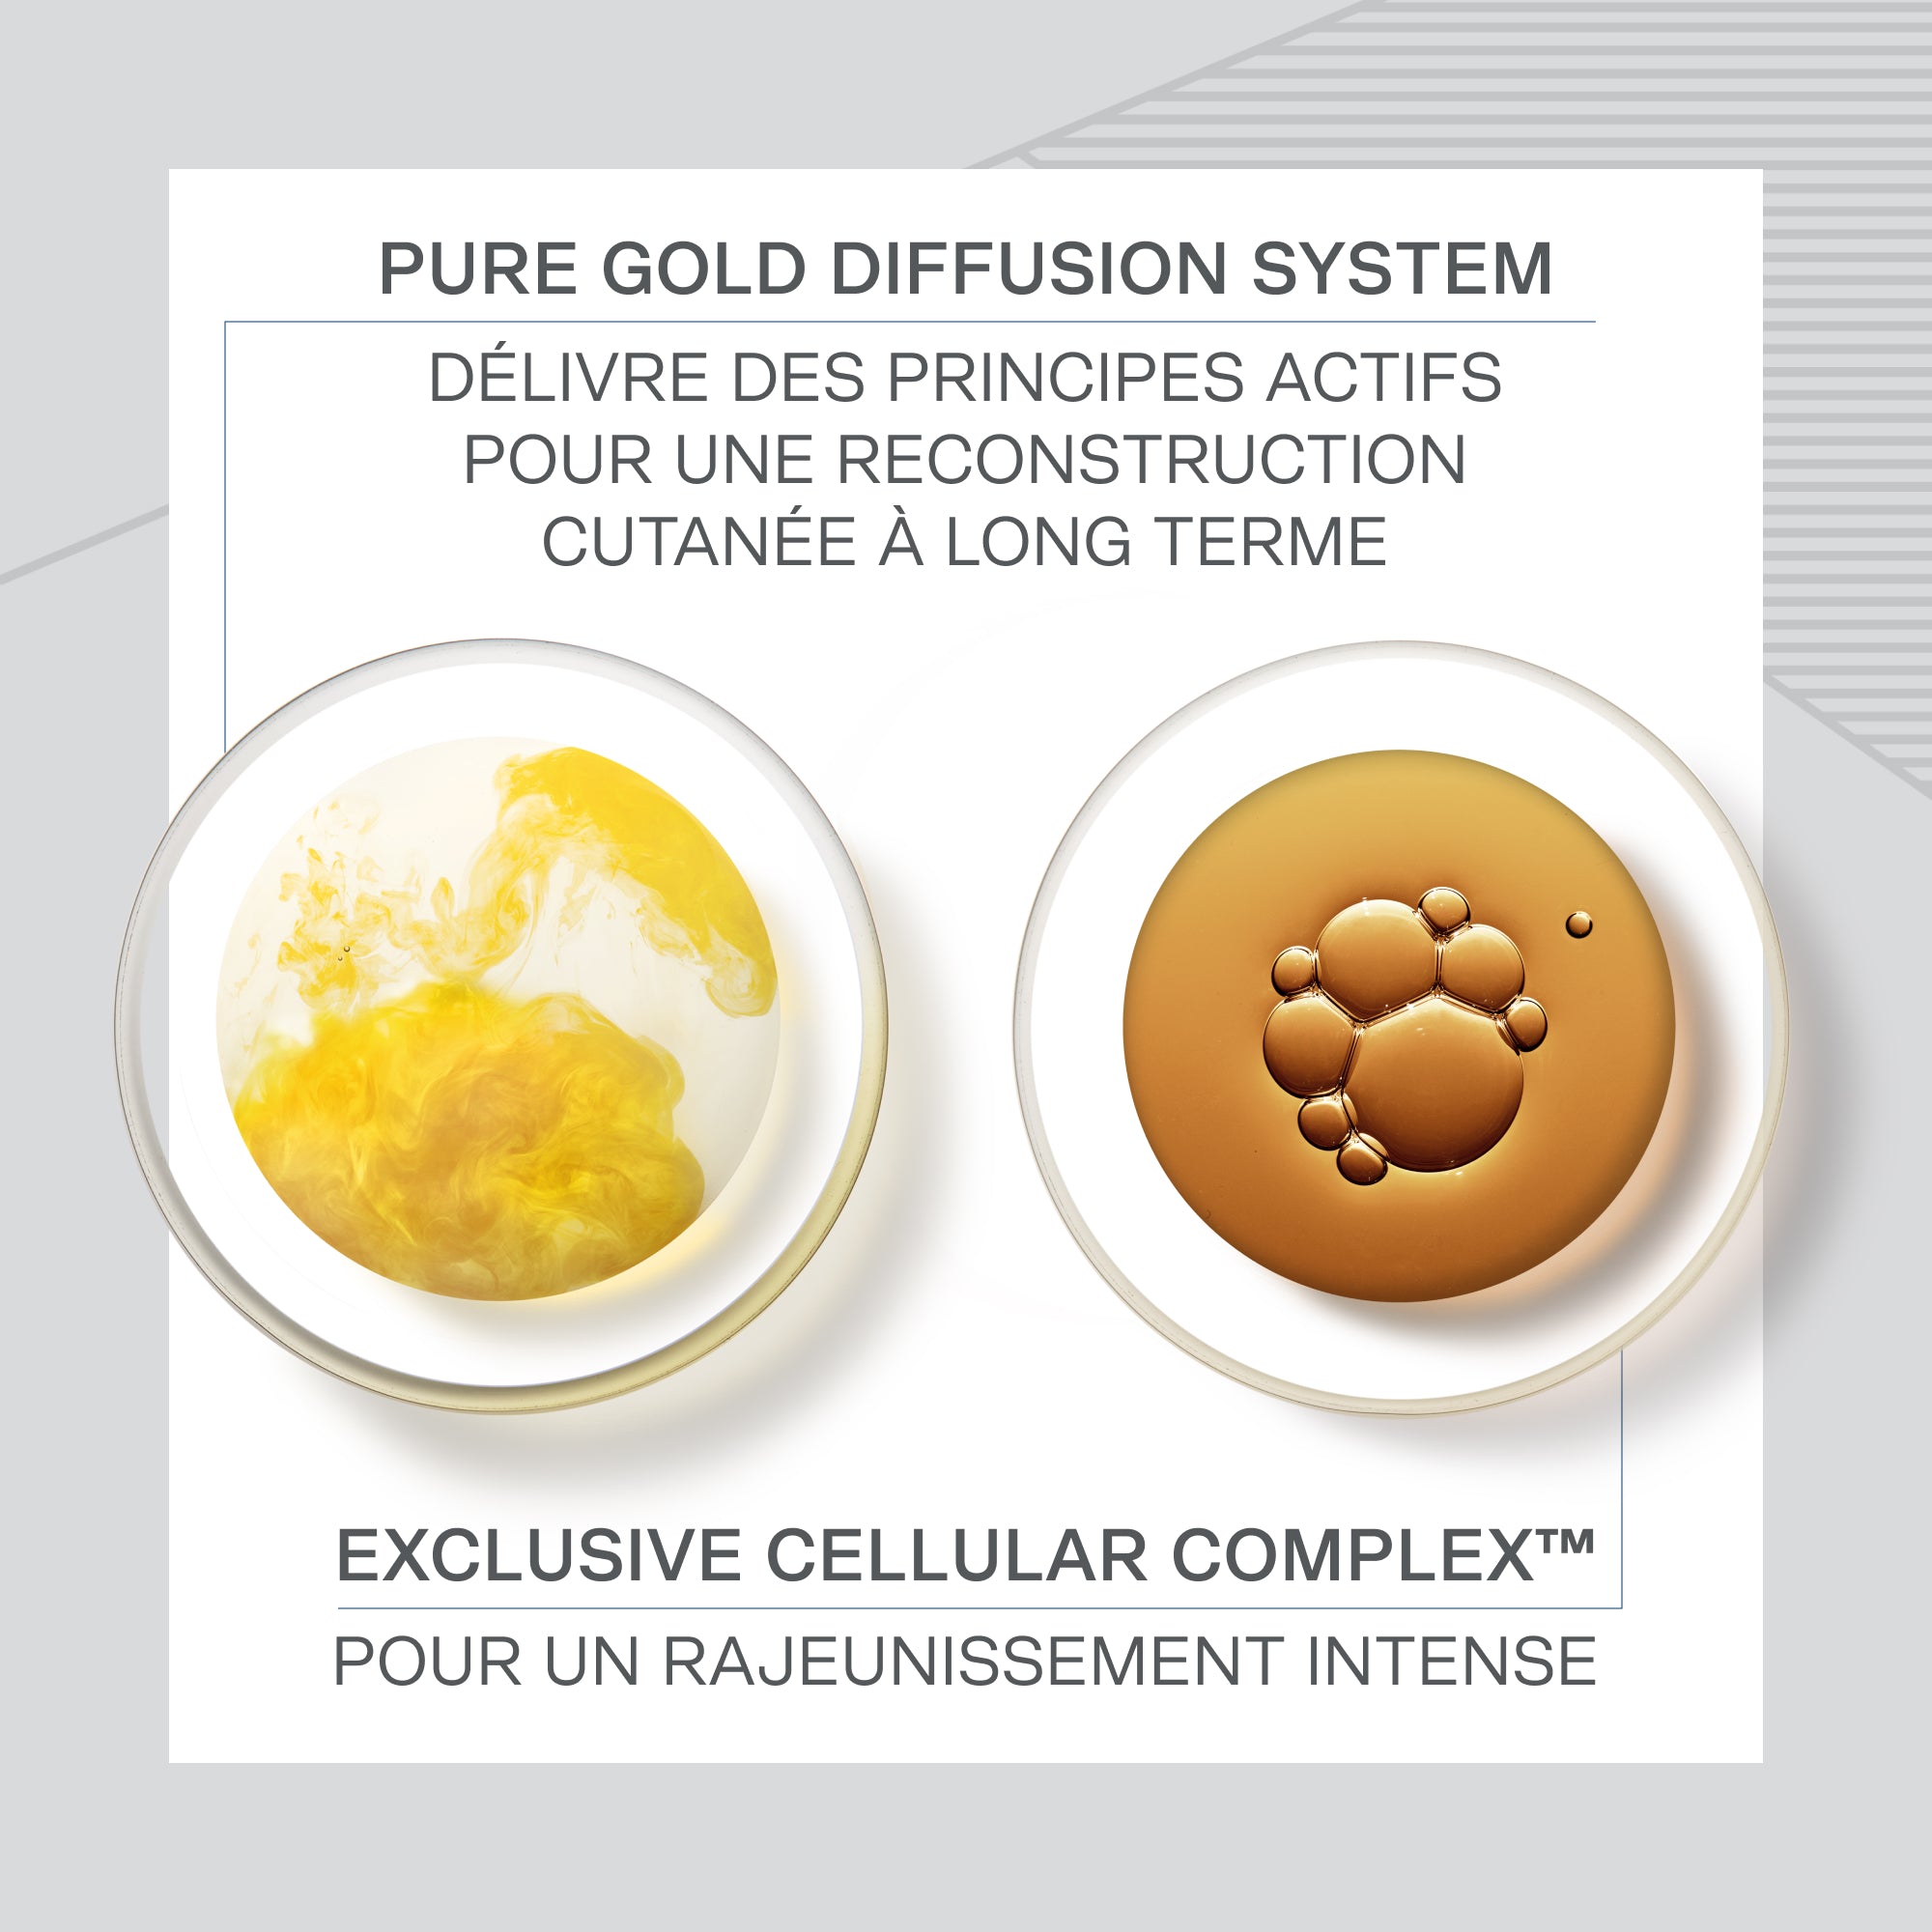 Pure Gold Crème Radiance - recharge